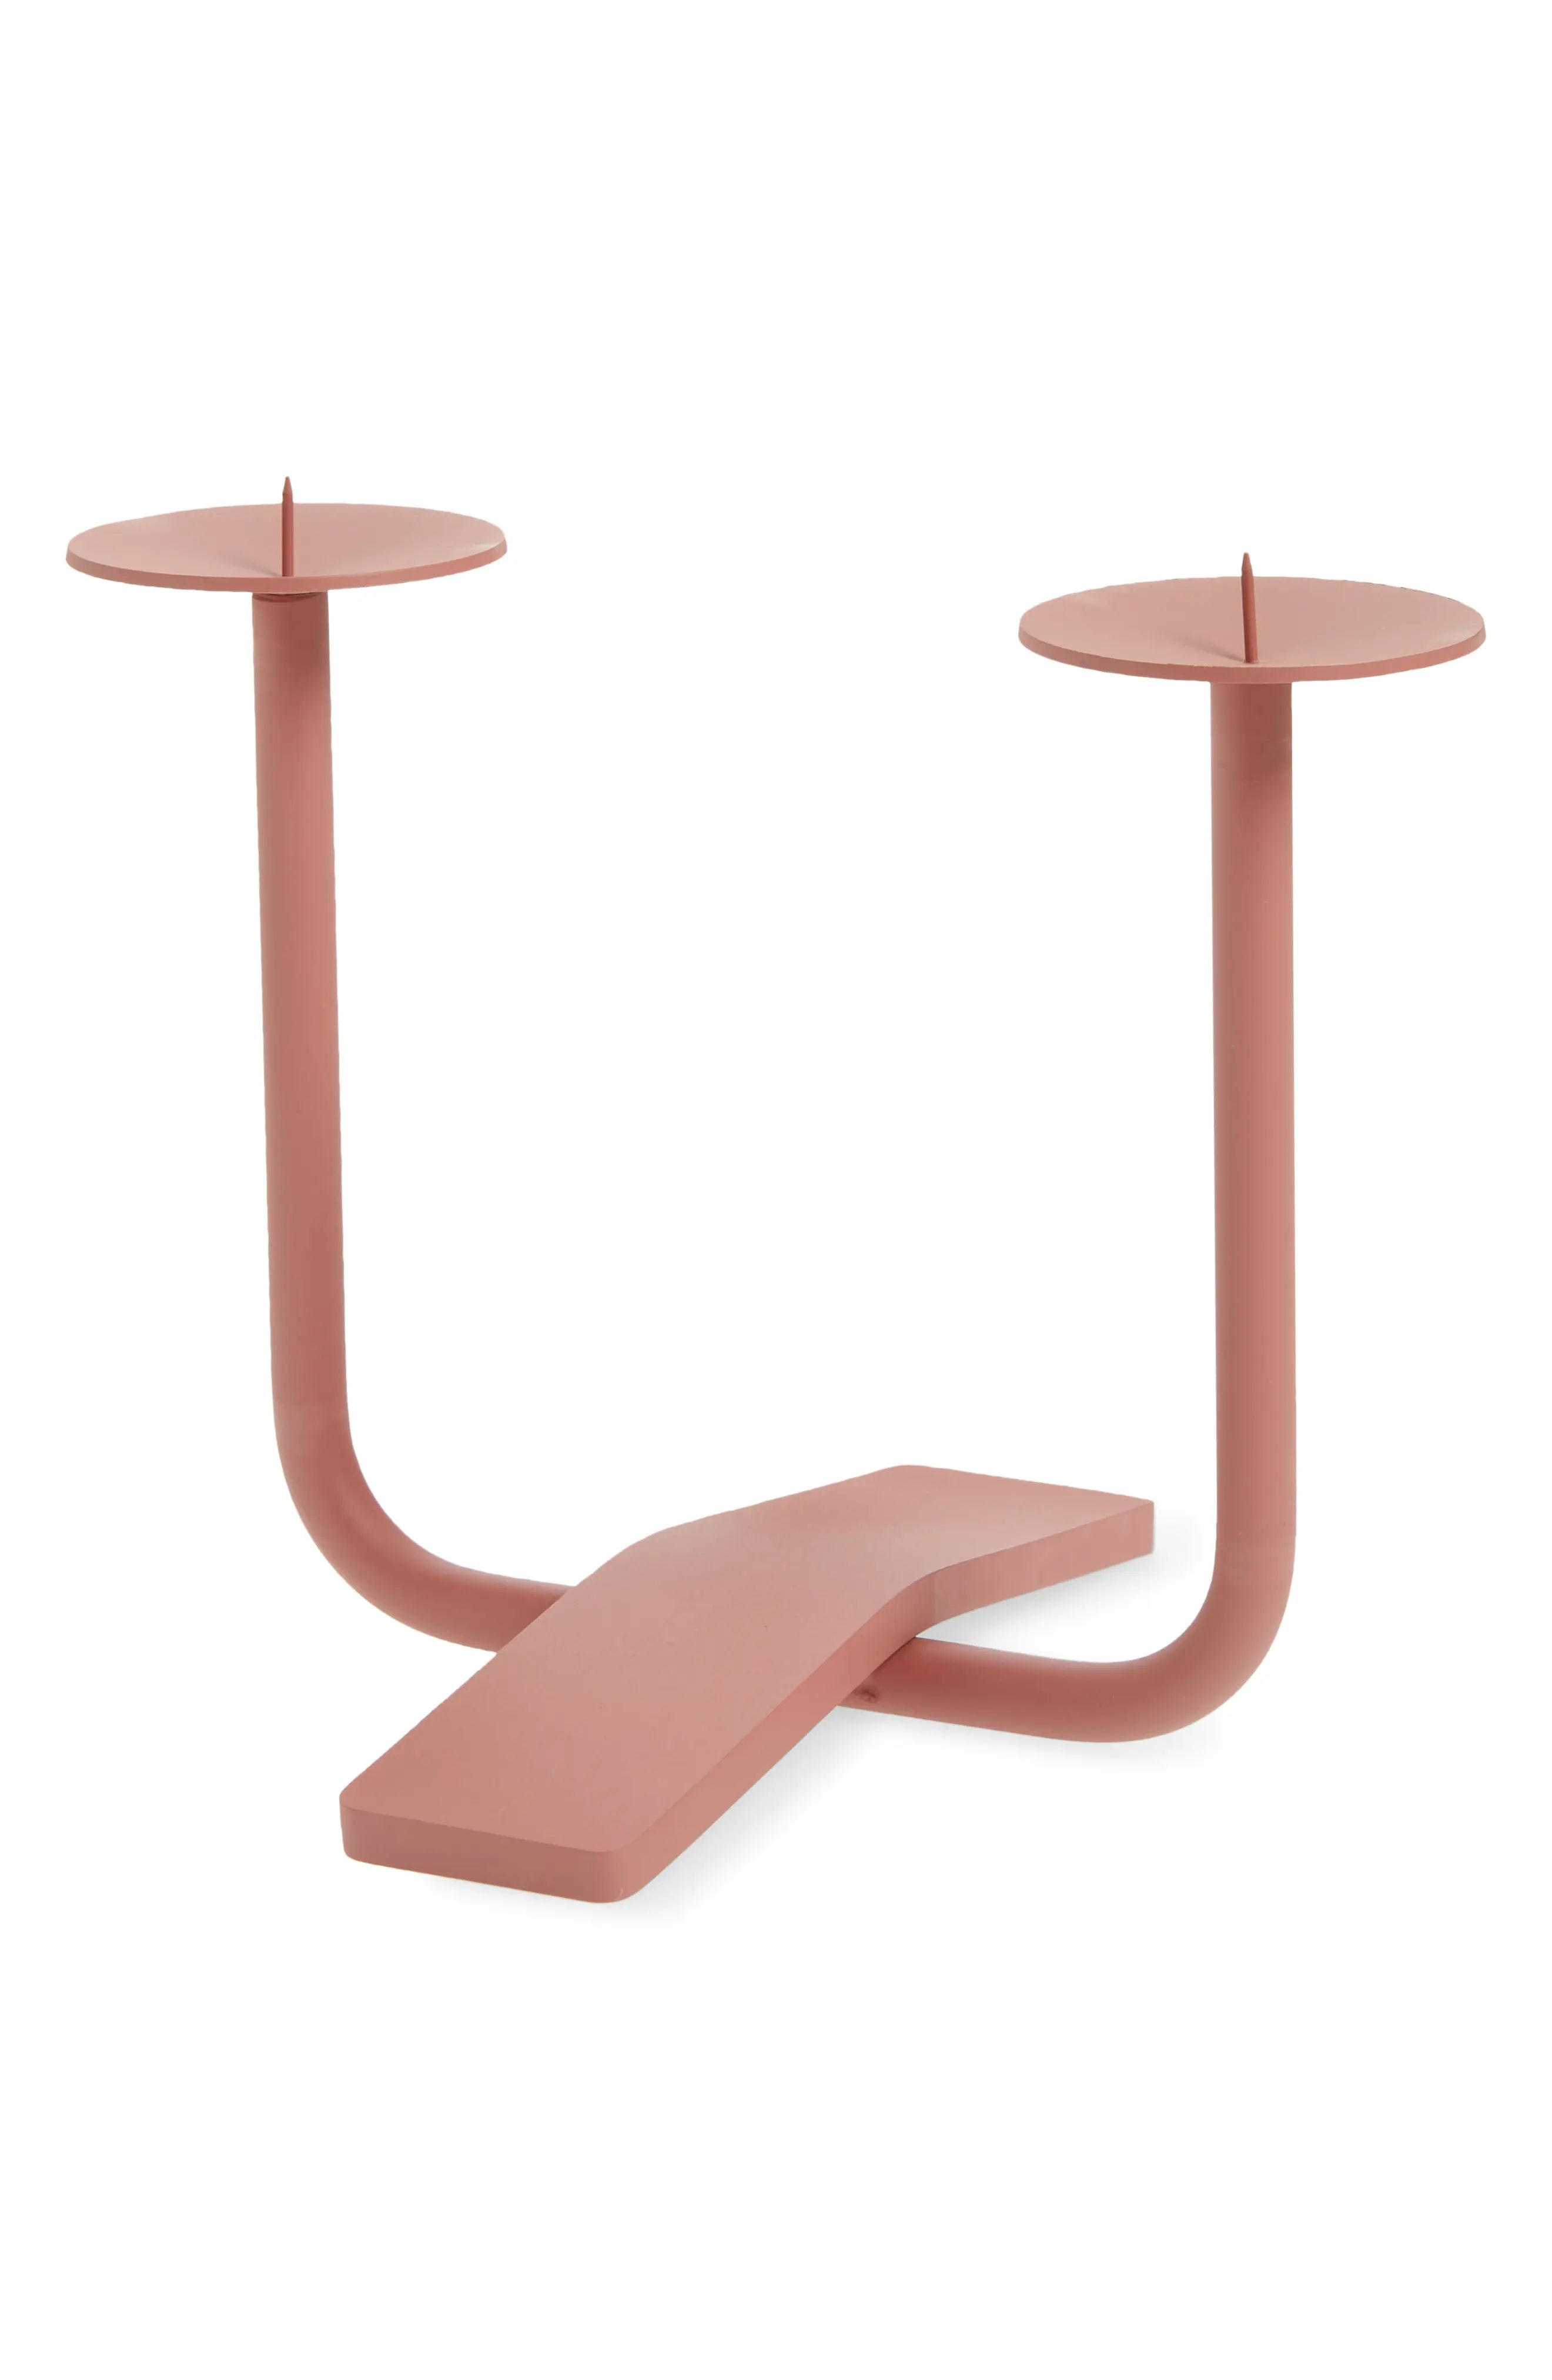 Via Maris Rest Candle Holder in Clay at Nordstrom | Nordstrom